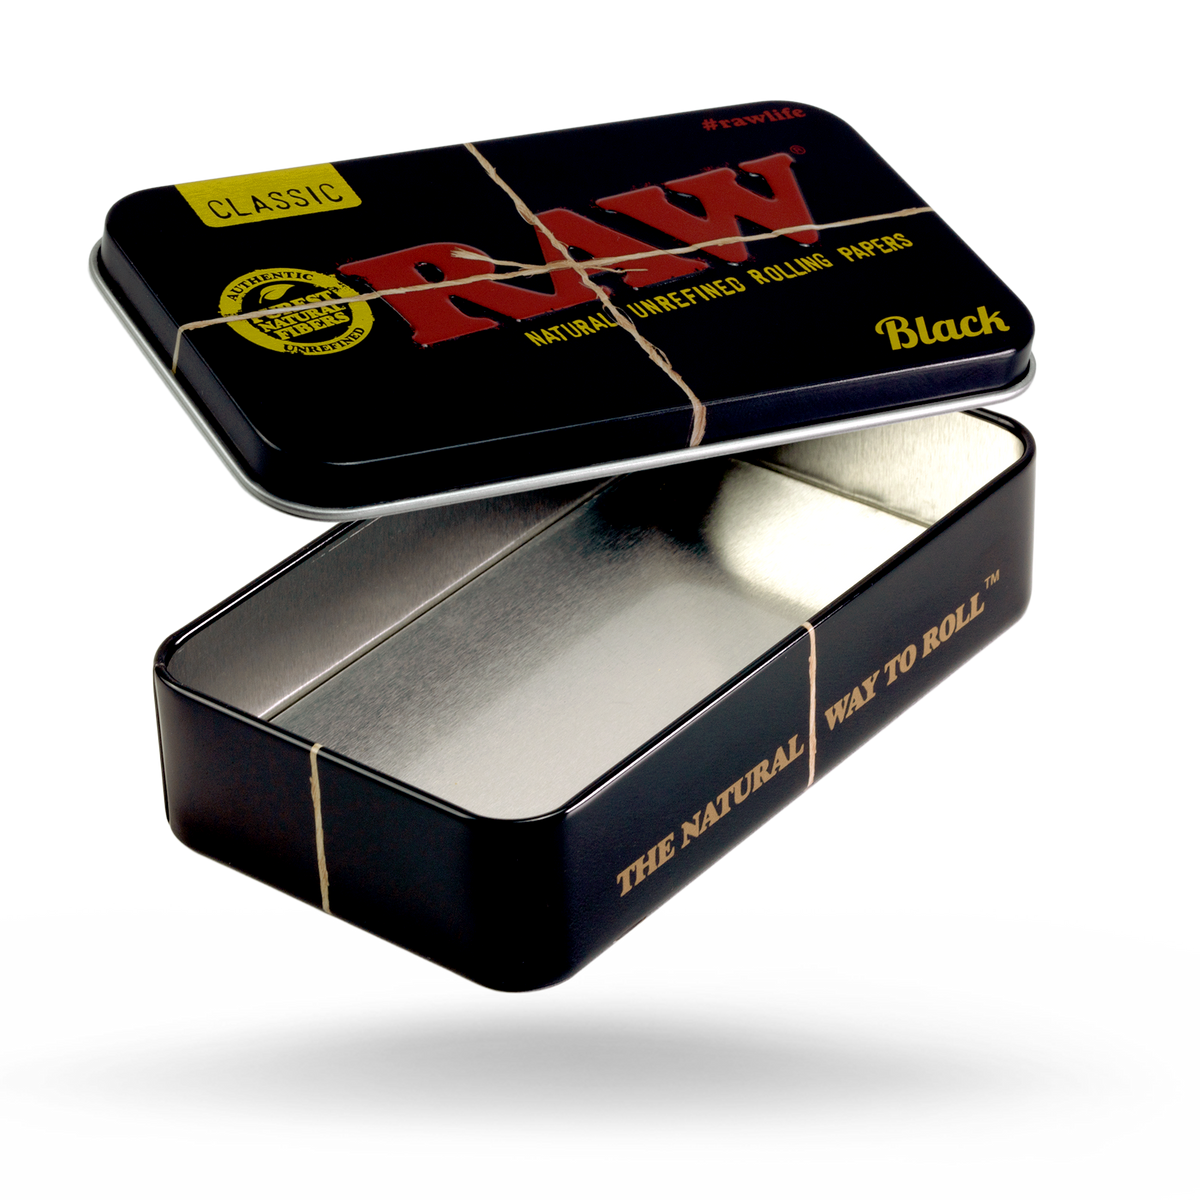 RAW Black 1 1/4 Bundle with Protective Tin Box Bundles RAWR-CNCL-1403 esd-official